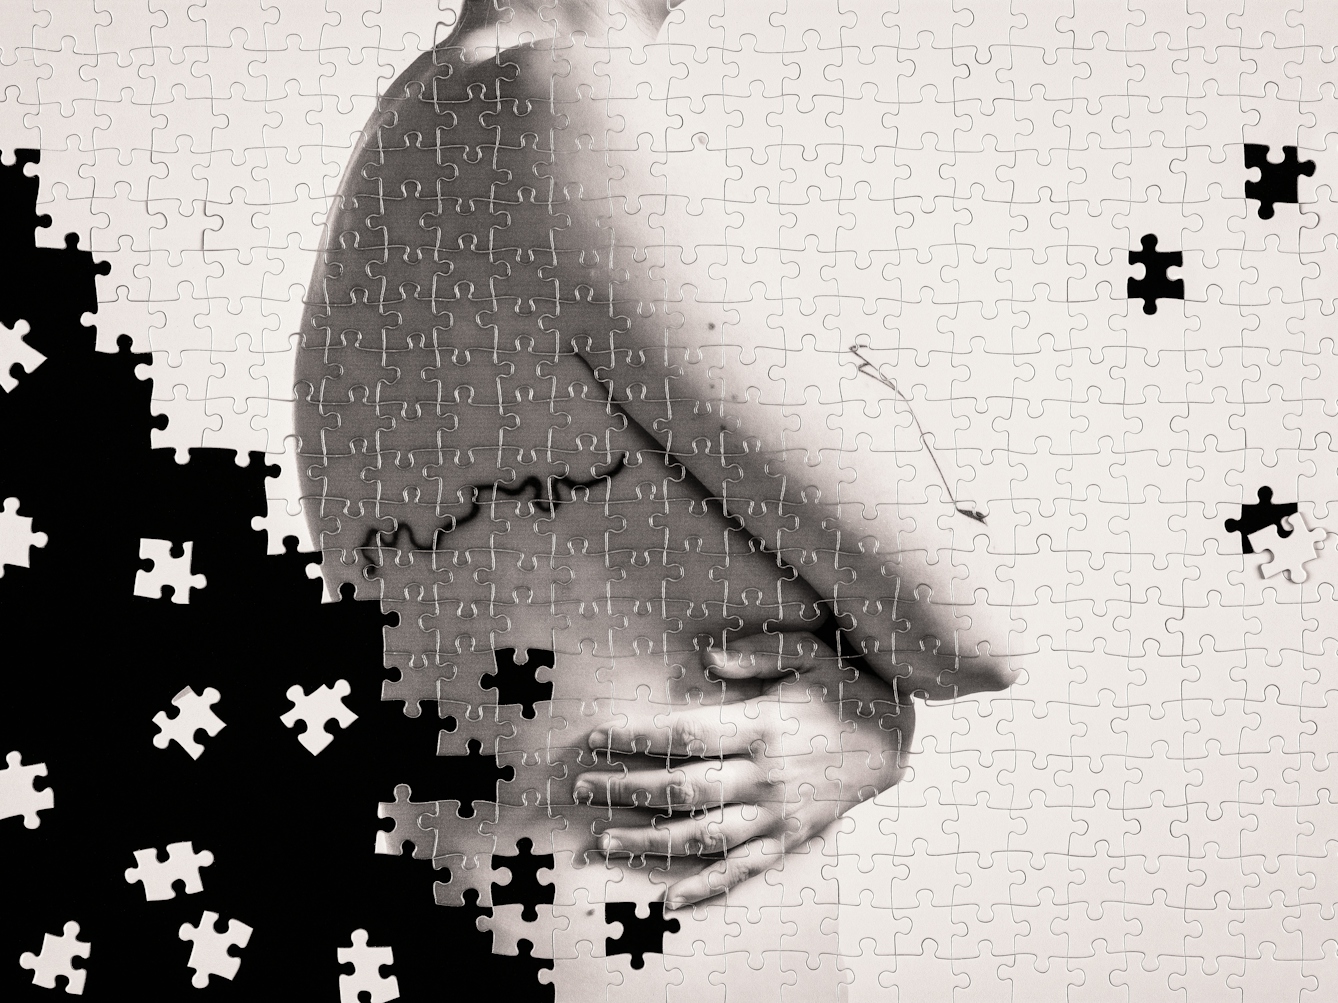 Photograph of a part made jigsaw puzzle containing hundreds of pieces. The jigsaw has been photographed against a black background, with many of the unused pieces scattered around in the black space. The image on the jigsaw is a warmed toned, monotone photograph of a nude woman against a plain light background. The woman is standing showing her right side from the waist to her neck. Her arms are wrapped across her torso, covering her breasts. On her side and back is a tattoo which traces the course of the River Thames. The missing jigsaw pieces create a black void which encroaches from the left and fragments the image of the woman. There are also 3 jigsaw pieces missing or displaced from the solid puzzle on the right side of the image.